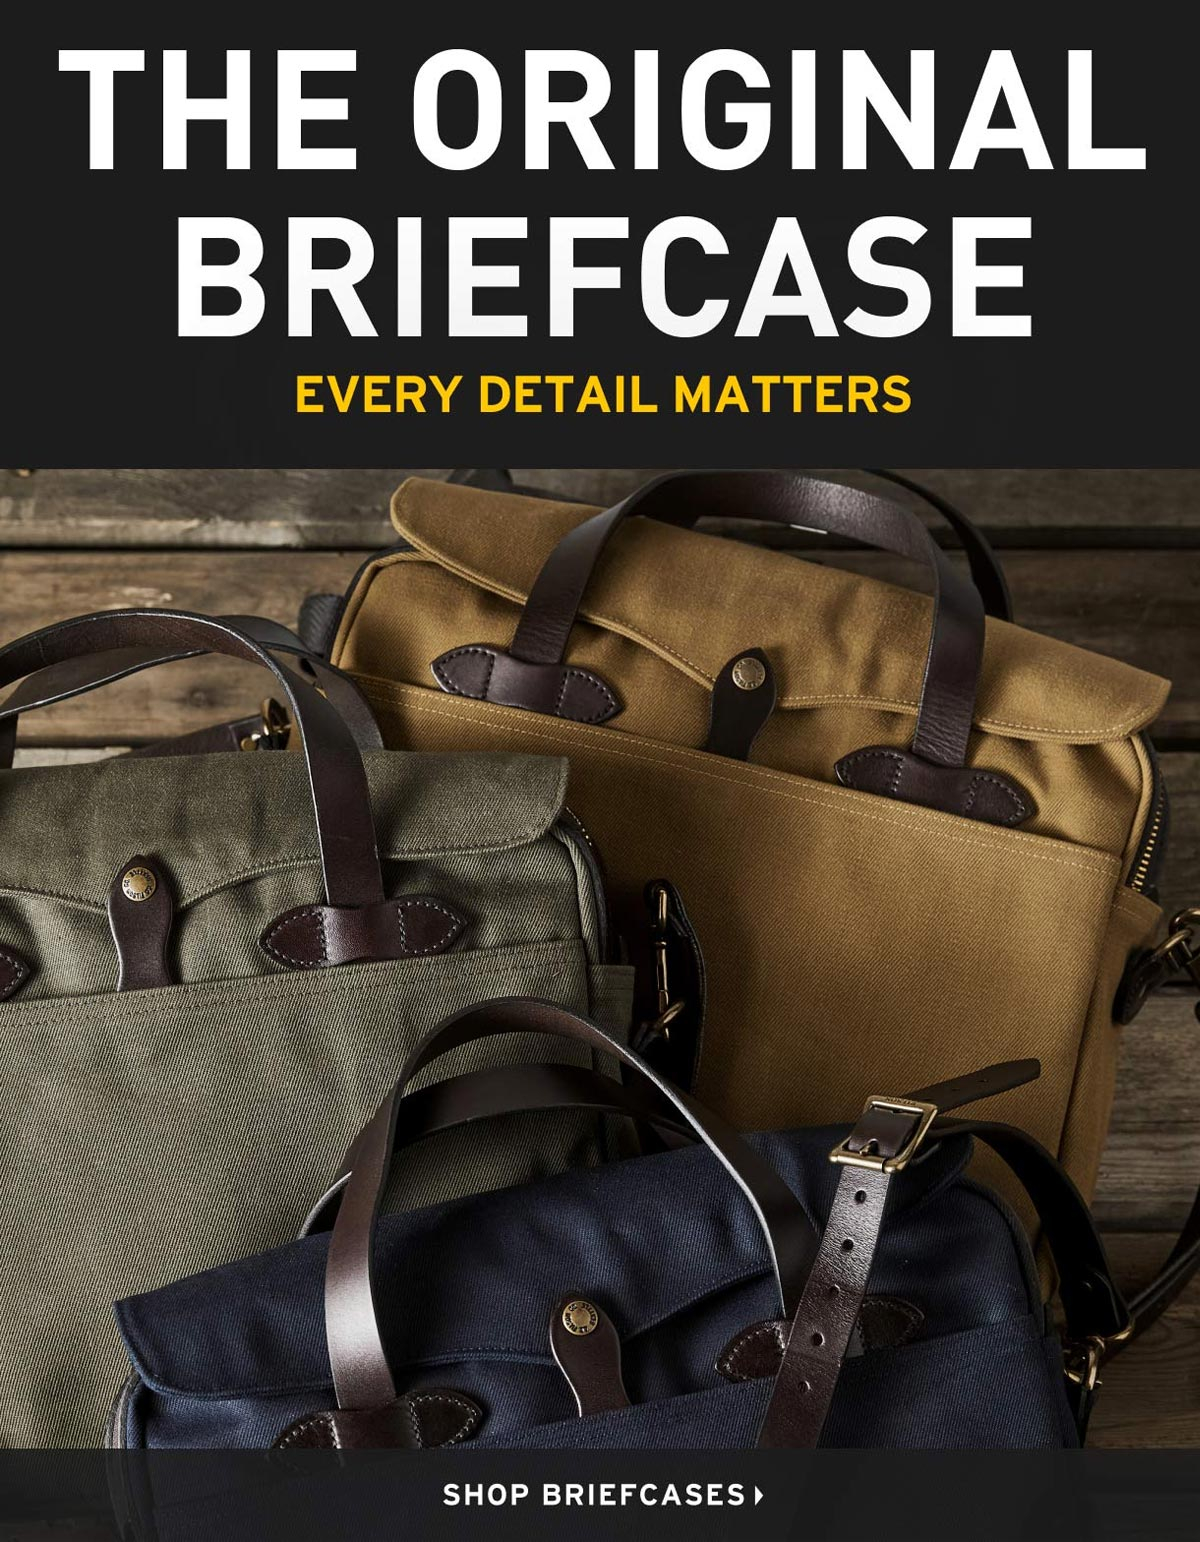 Filson Original Briefcase Navy, Tan and OtterGreen, every detail matters